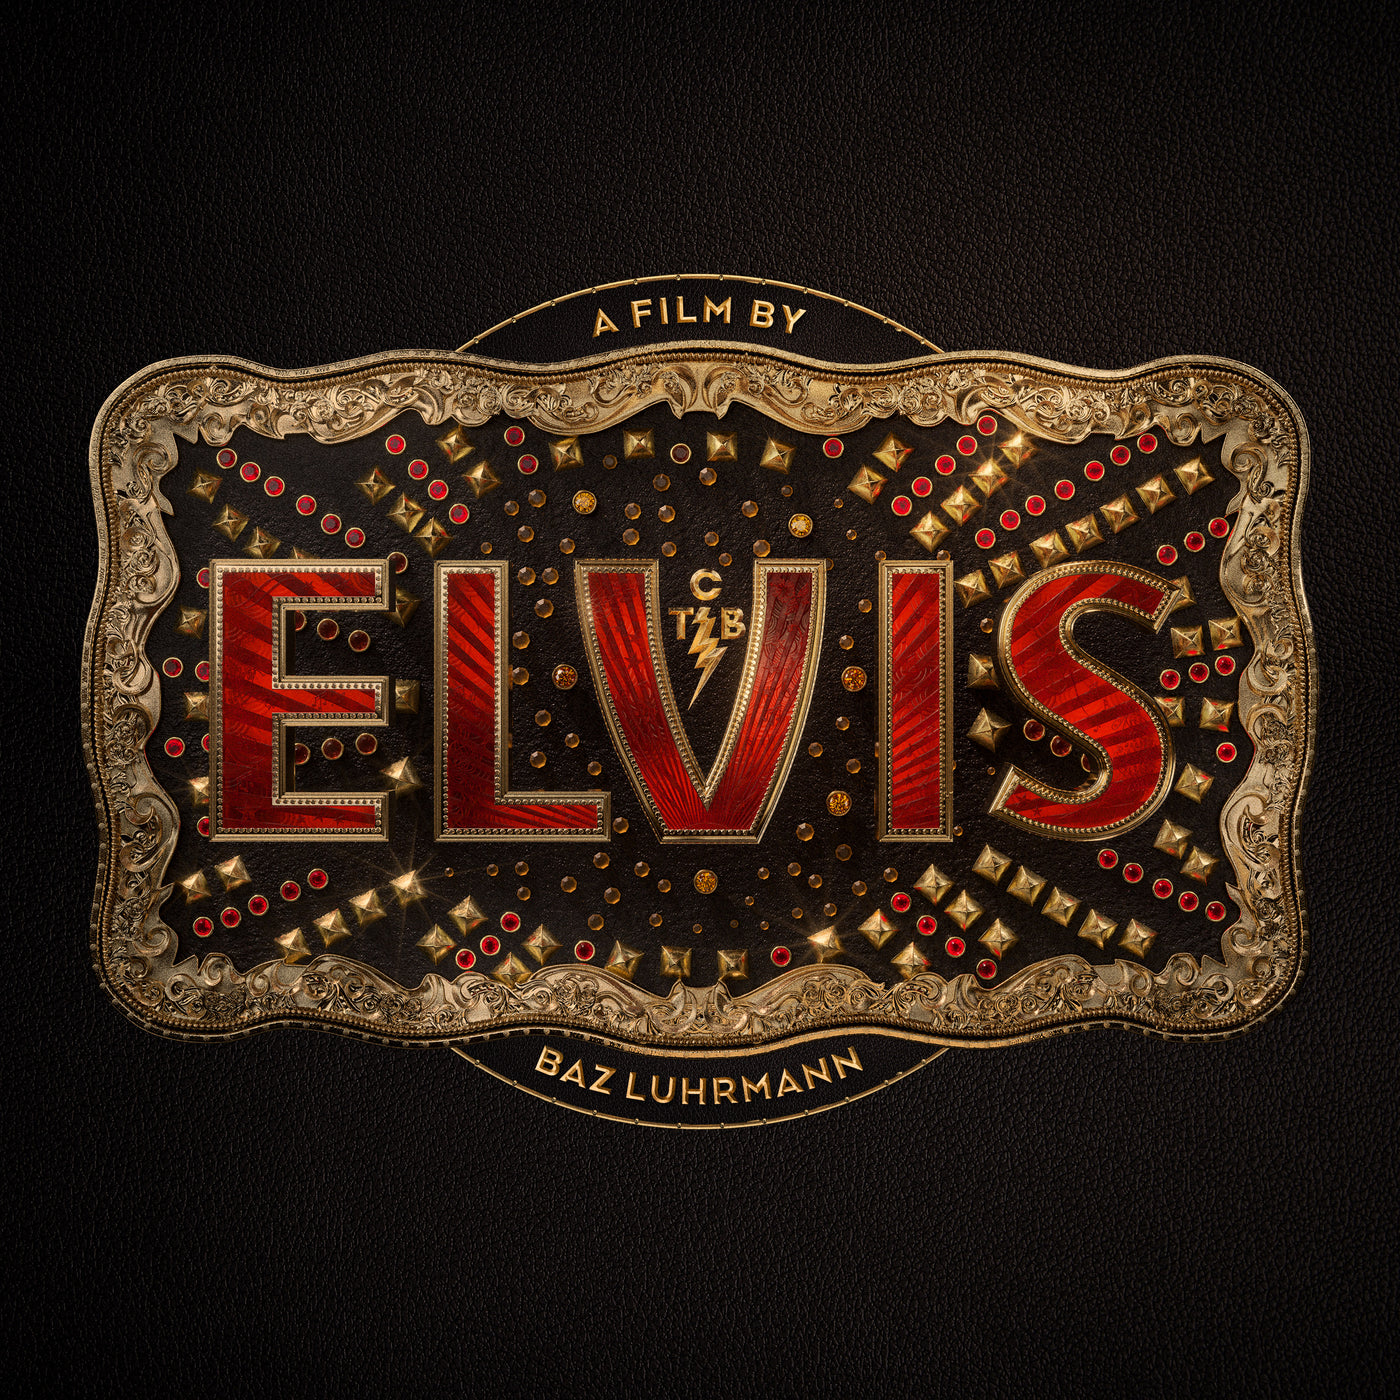 Elvis (4K UHD)  with Soundtrack CD and Poster